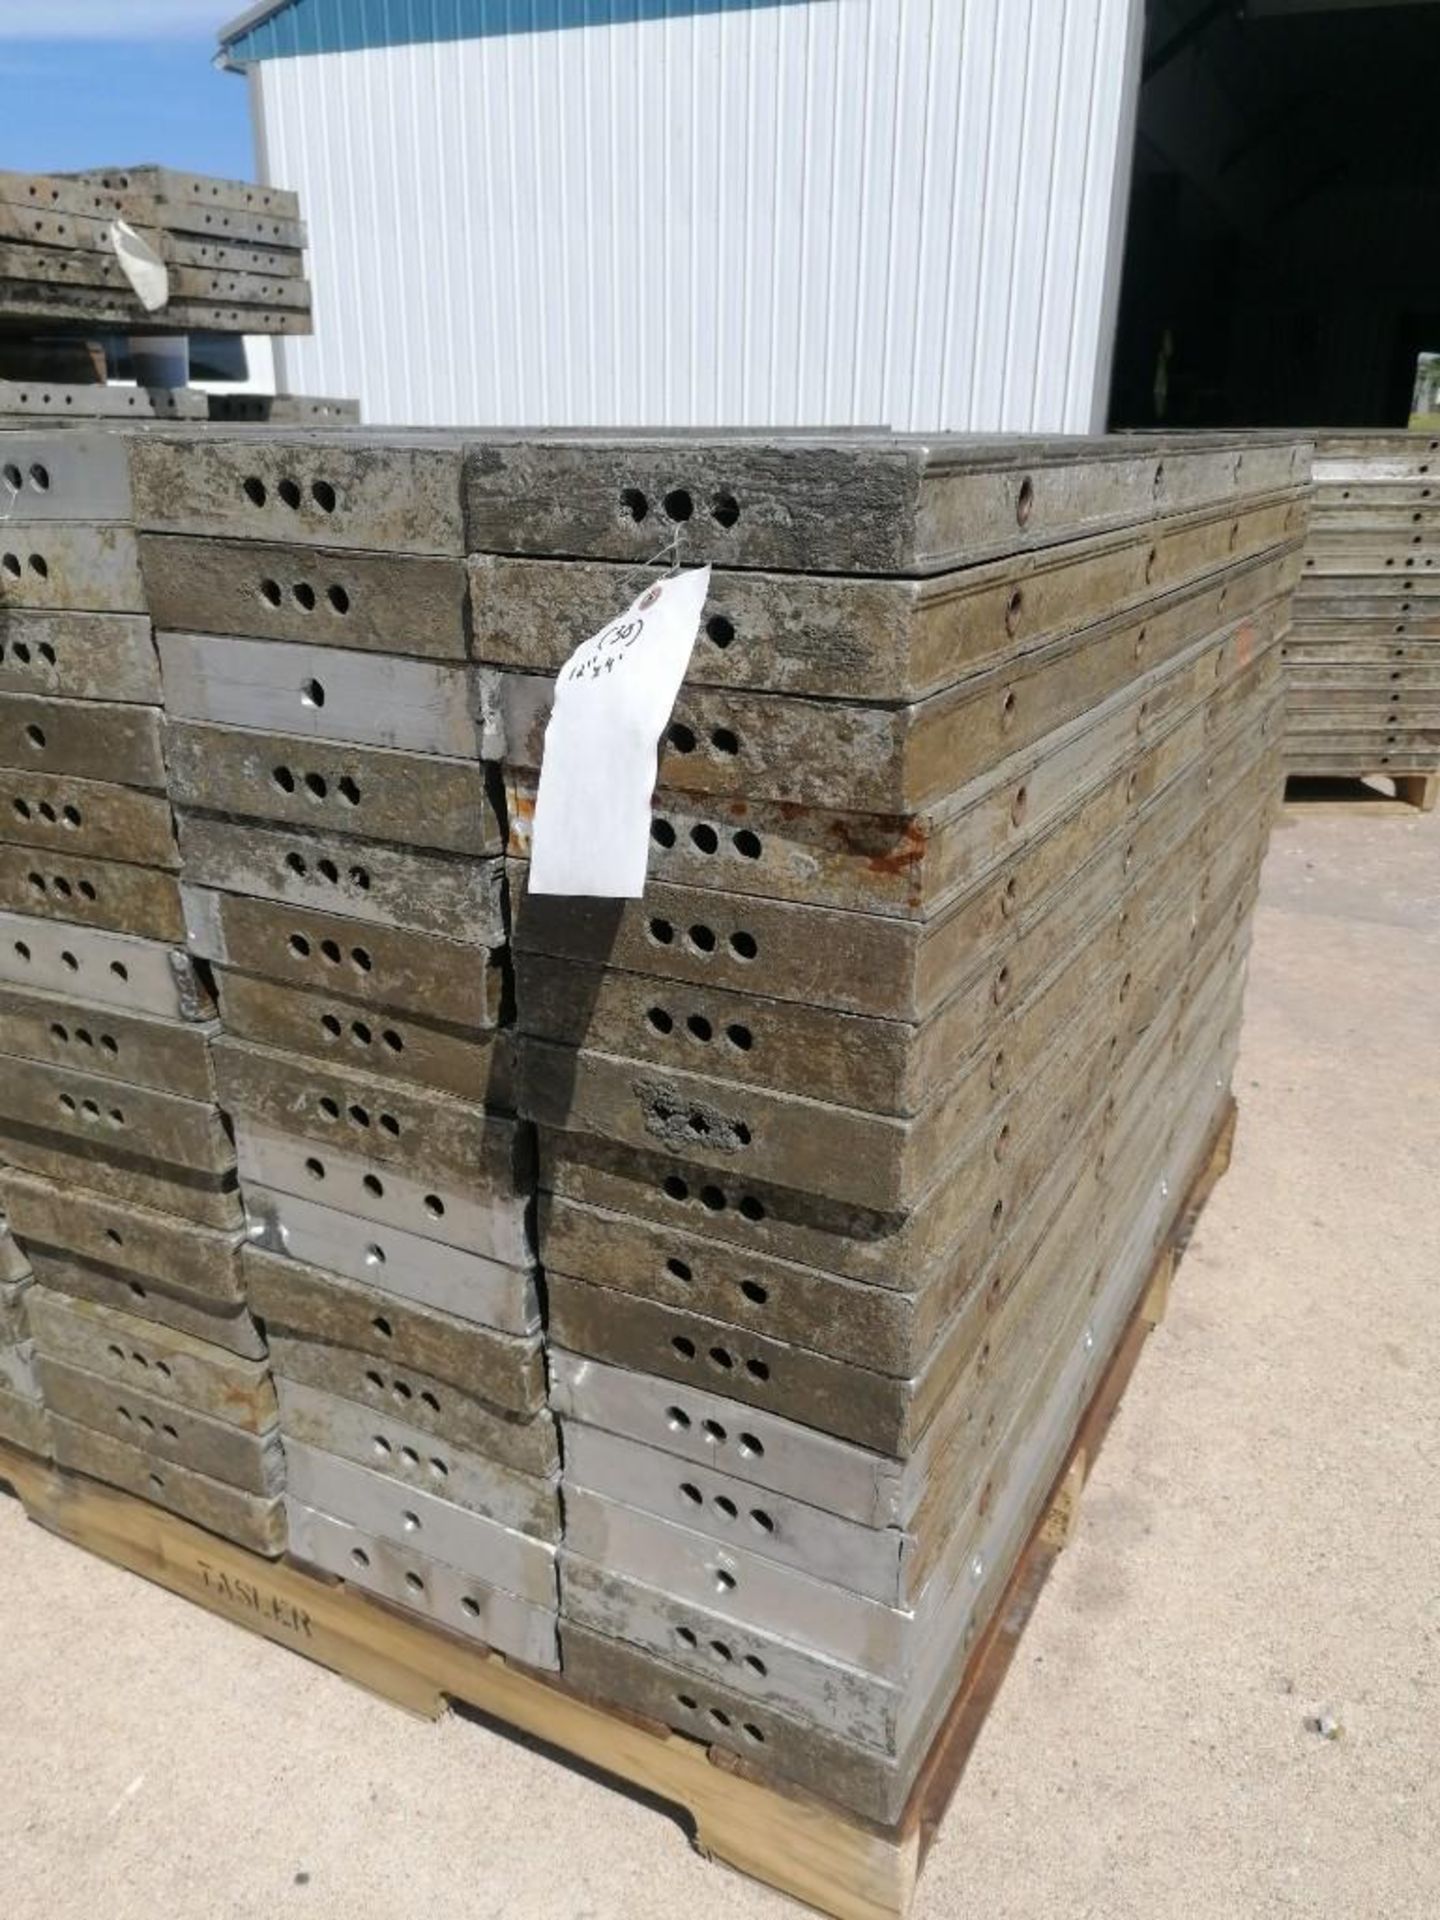 (30) 12" x 4' Wall-Ties Aluminum Concrete Forms, Smooth 6-12 Hole Pattern. Located at 301 E Henry